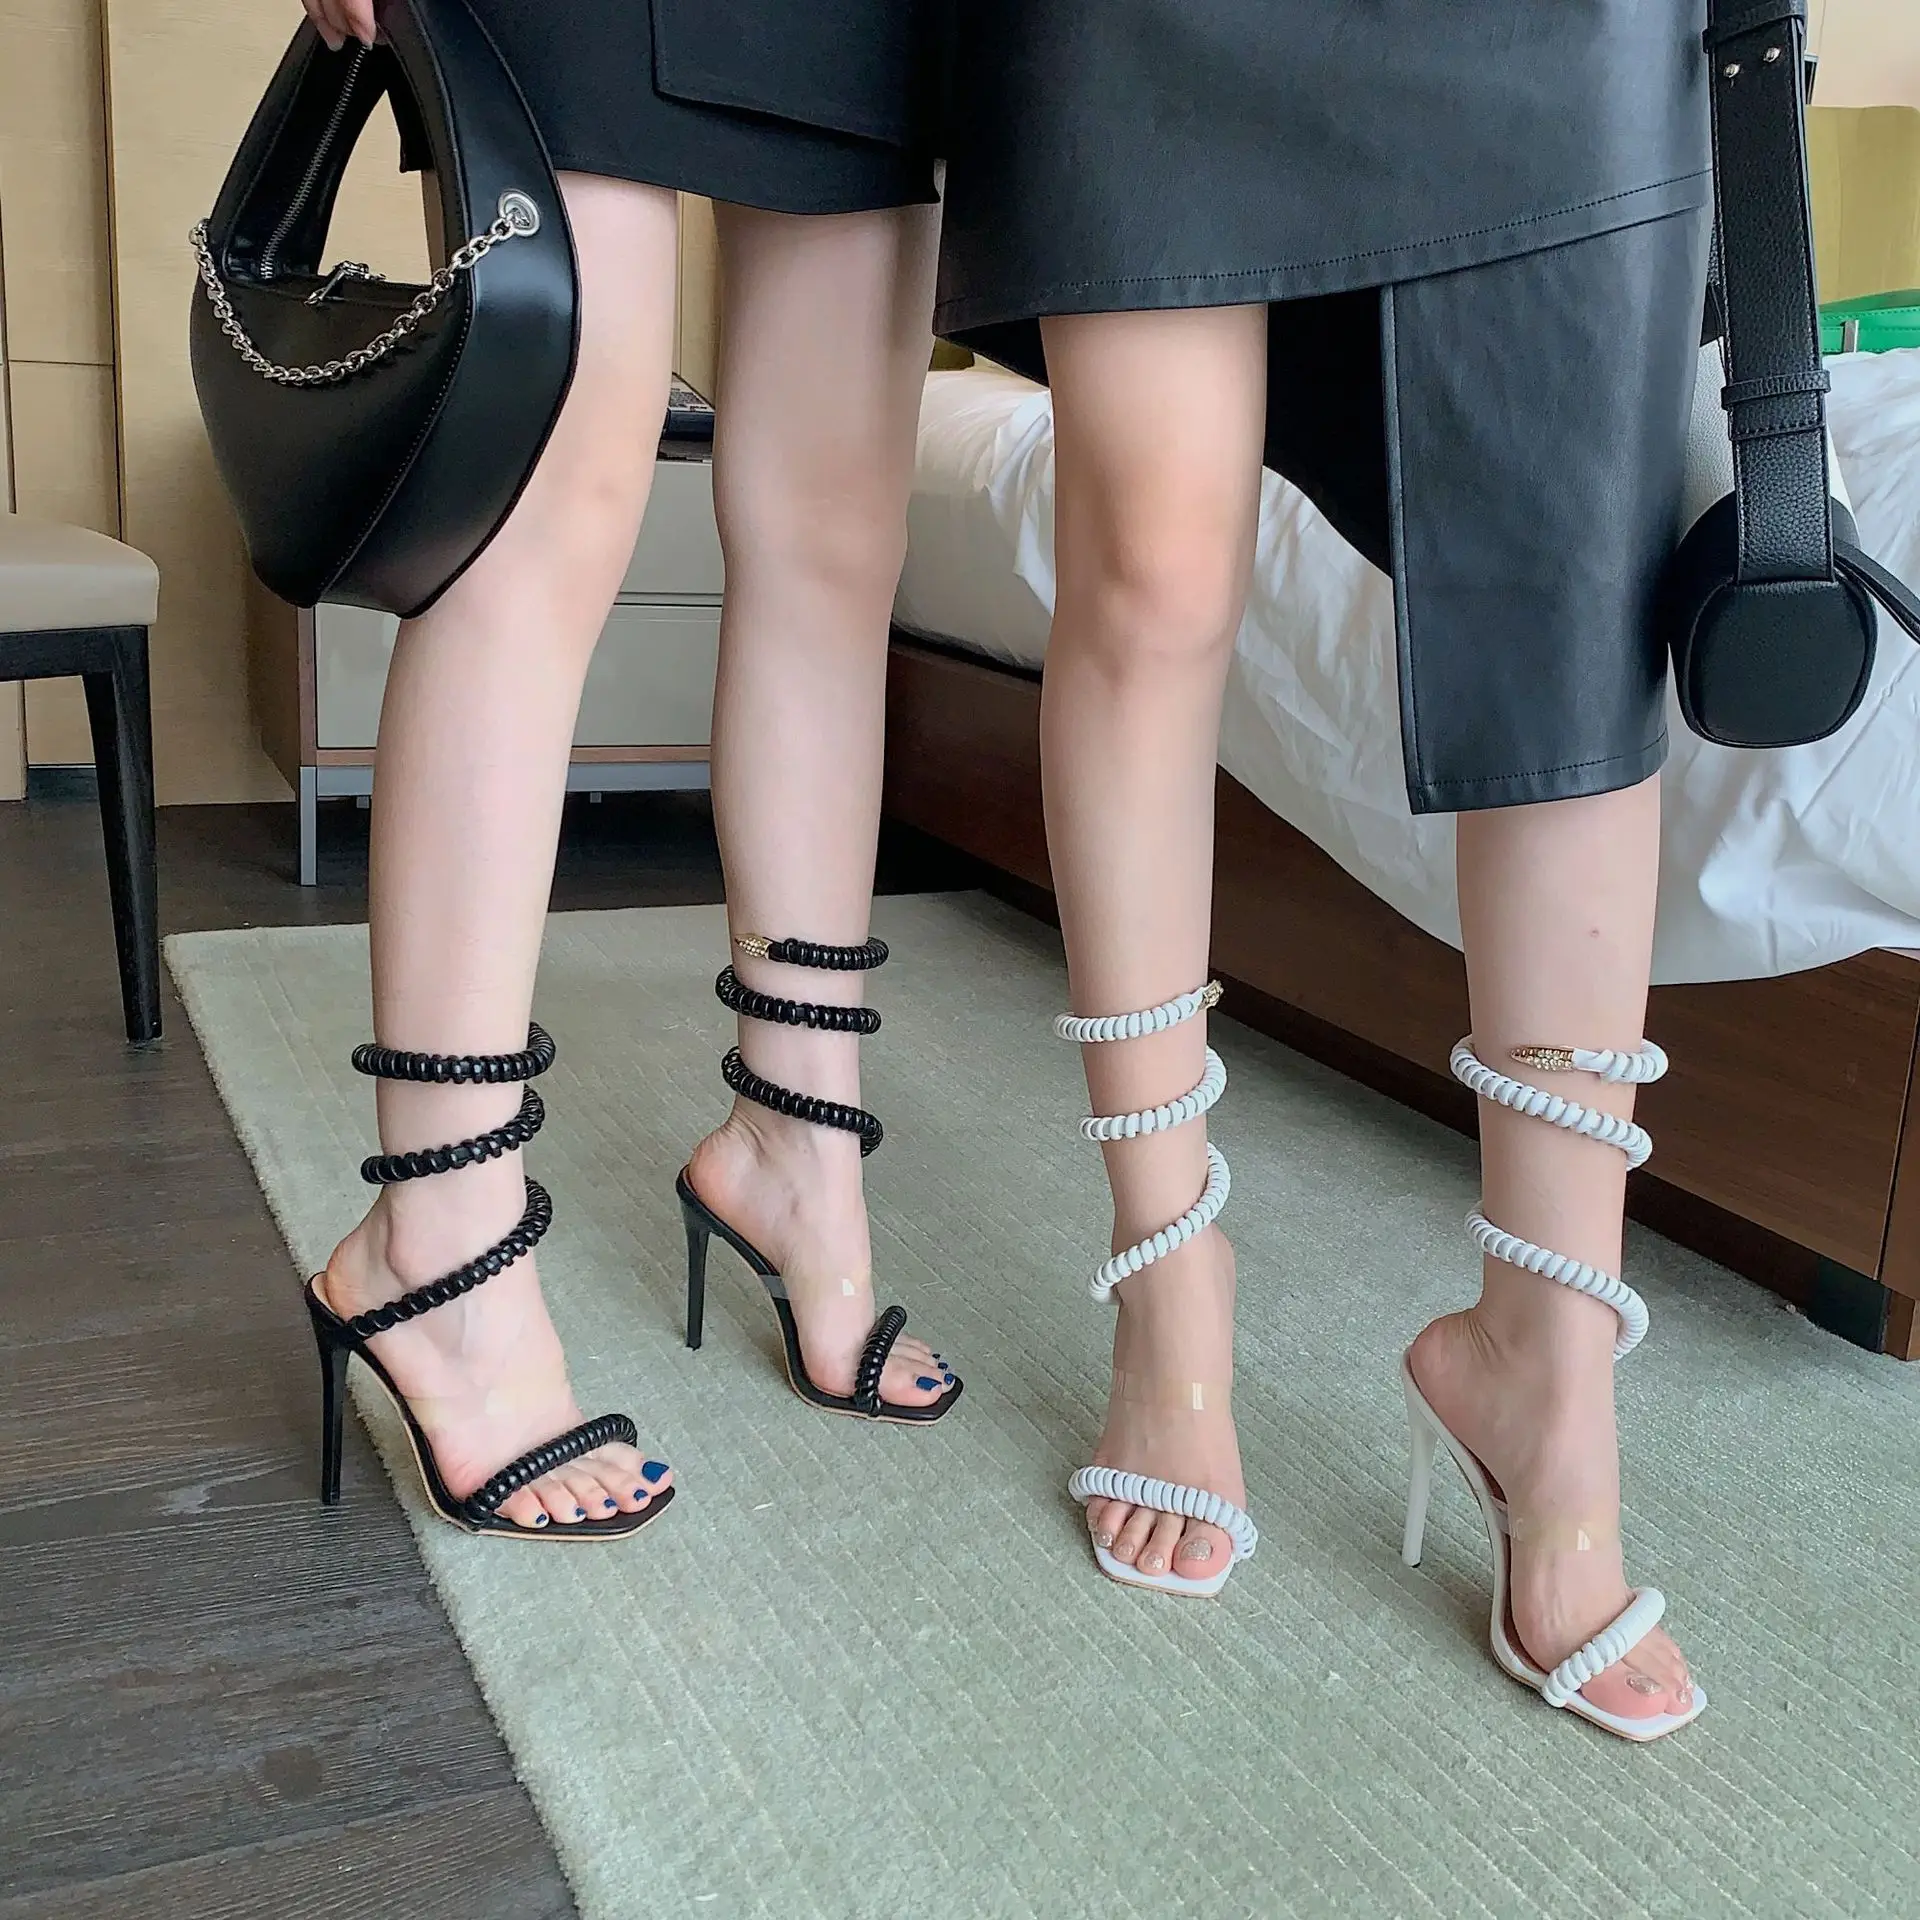 Phone cord Runway. Women's Sandals. Square Toe Snake Ankle Strap Designer Sandals. 2022 Hot Thin High Heels Stretch Sandals. adies Crystal Shoes